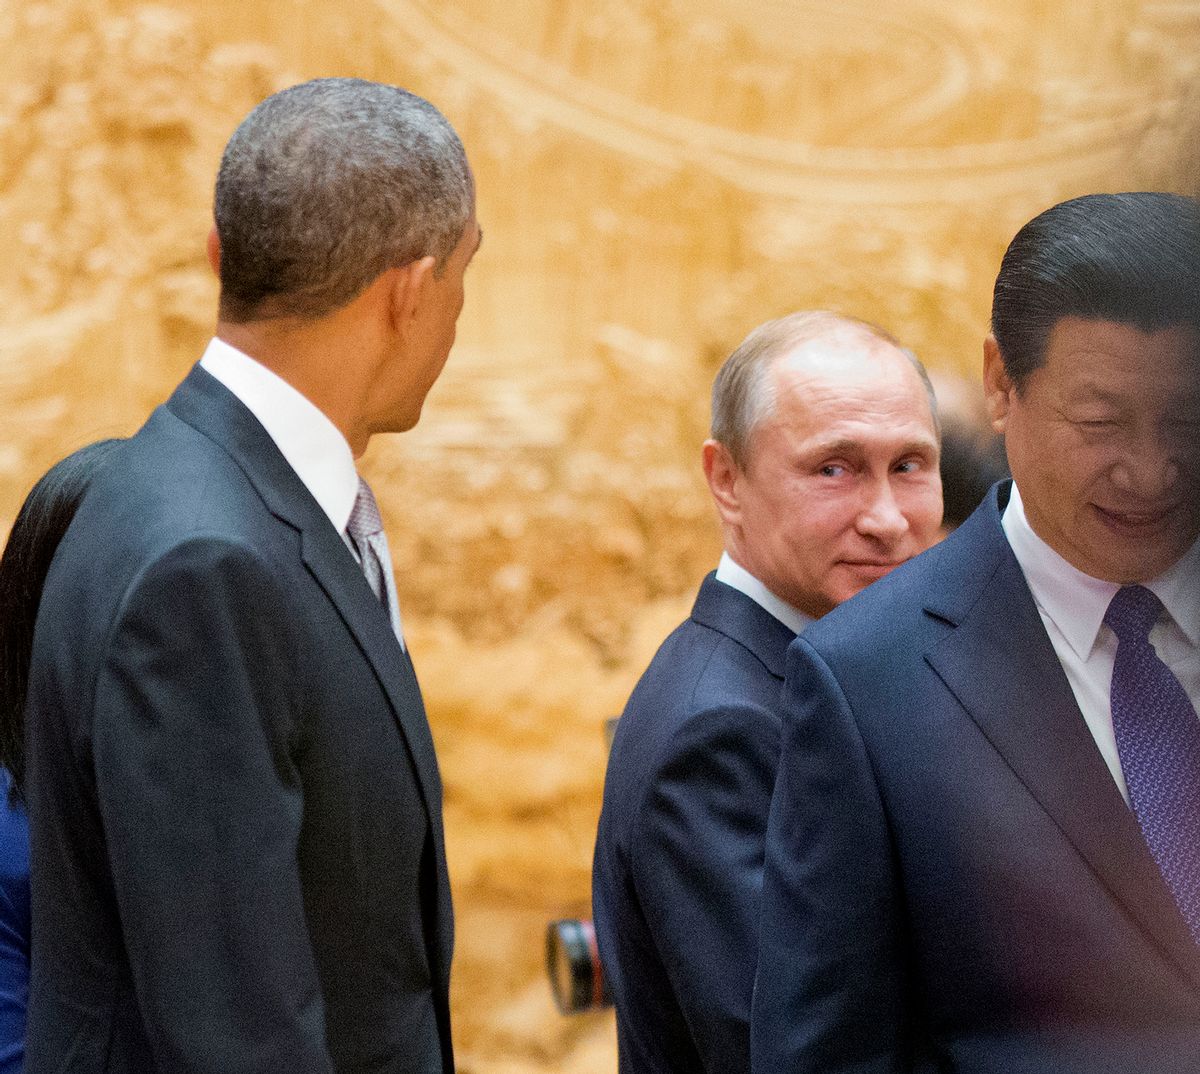 Russian President Vladimir Putin, center, looks back at US President Barack Obama, left, as they arrive with Chinese President Xi Jinping, right, at the the Asia-Pacific Economic Cooperation (APEC) Summit. (AP/Pablo Martinez Monsivais)